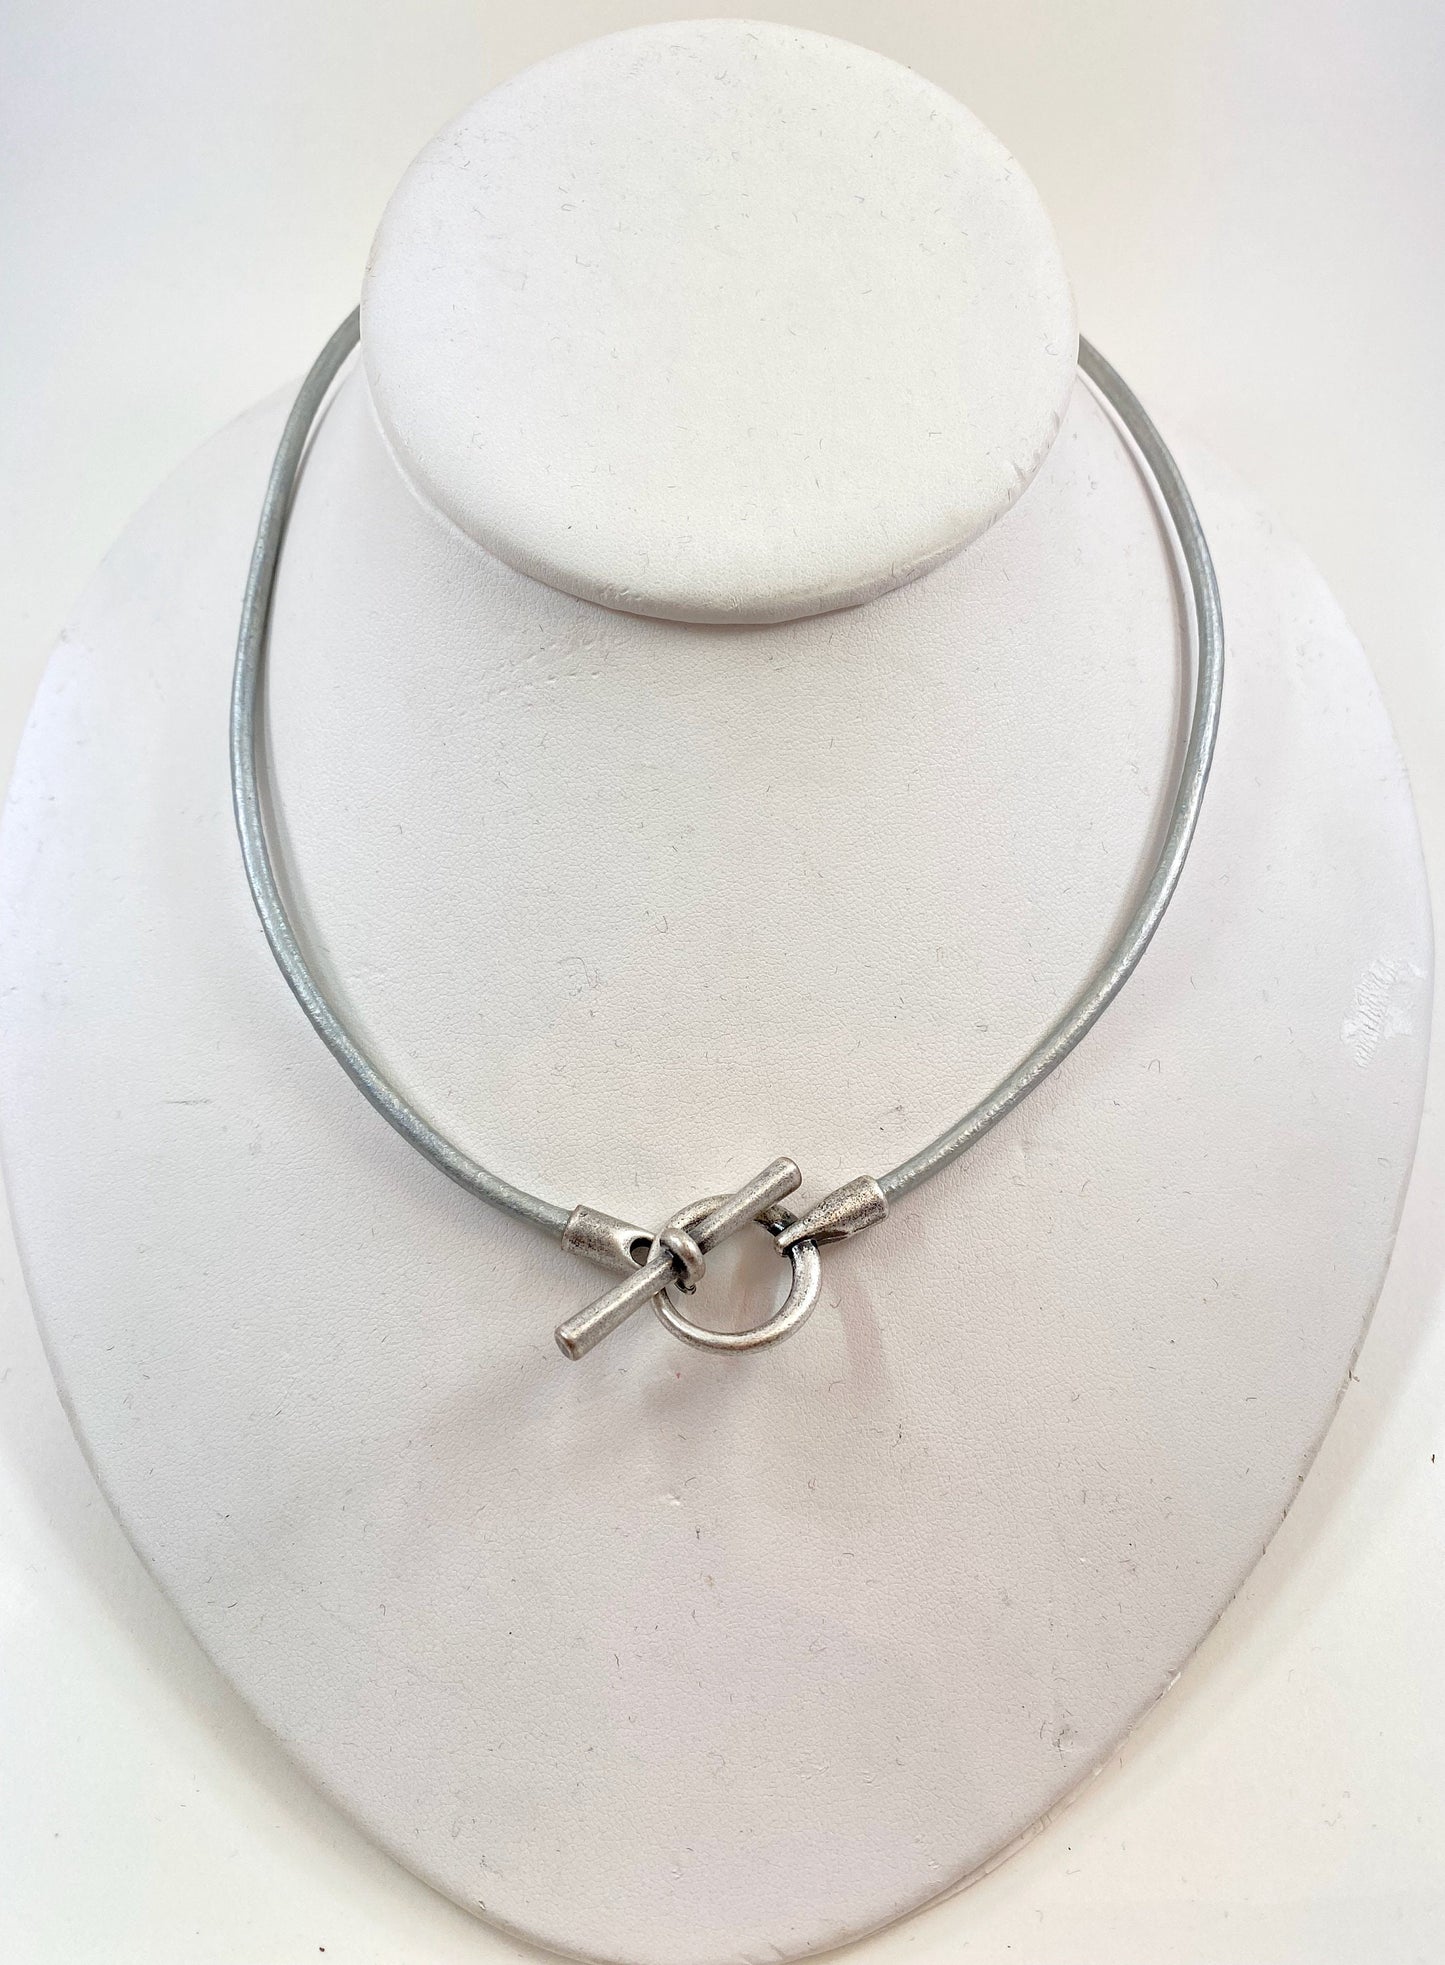 Leather Necklace. Hip silver Italian leather choker necklace fashioned with a center silver toggle clasp.